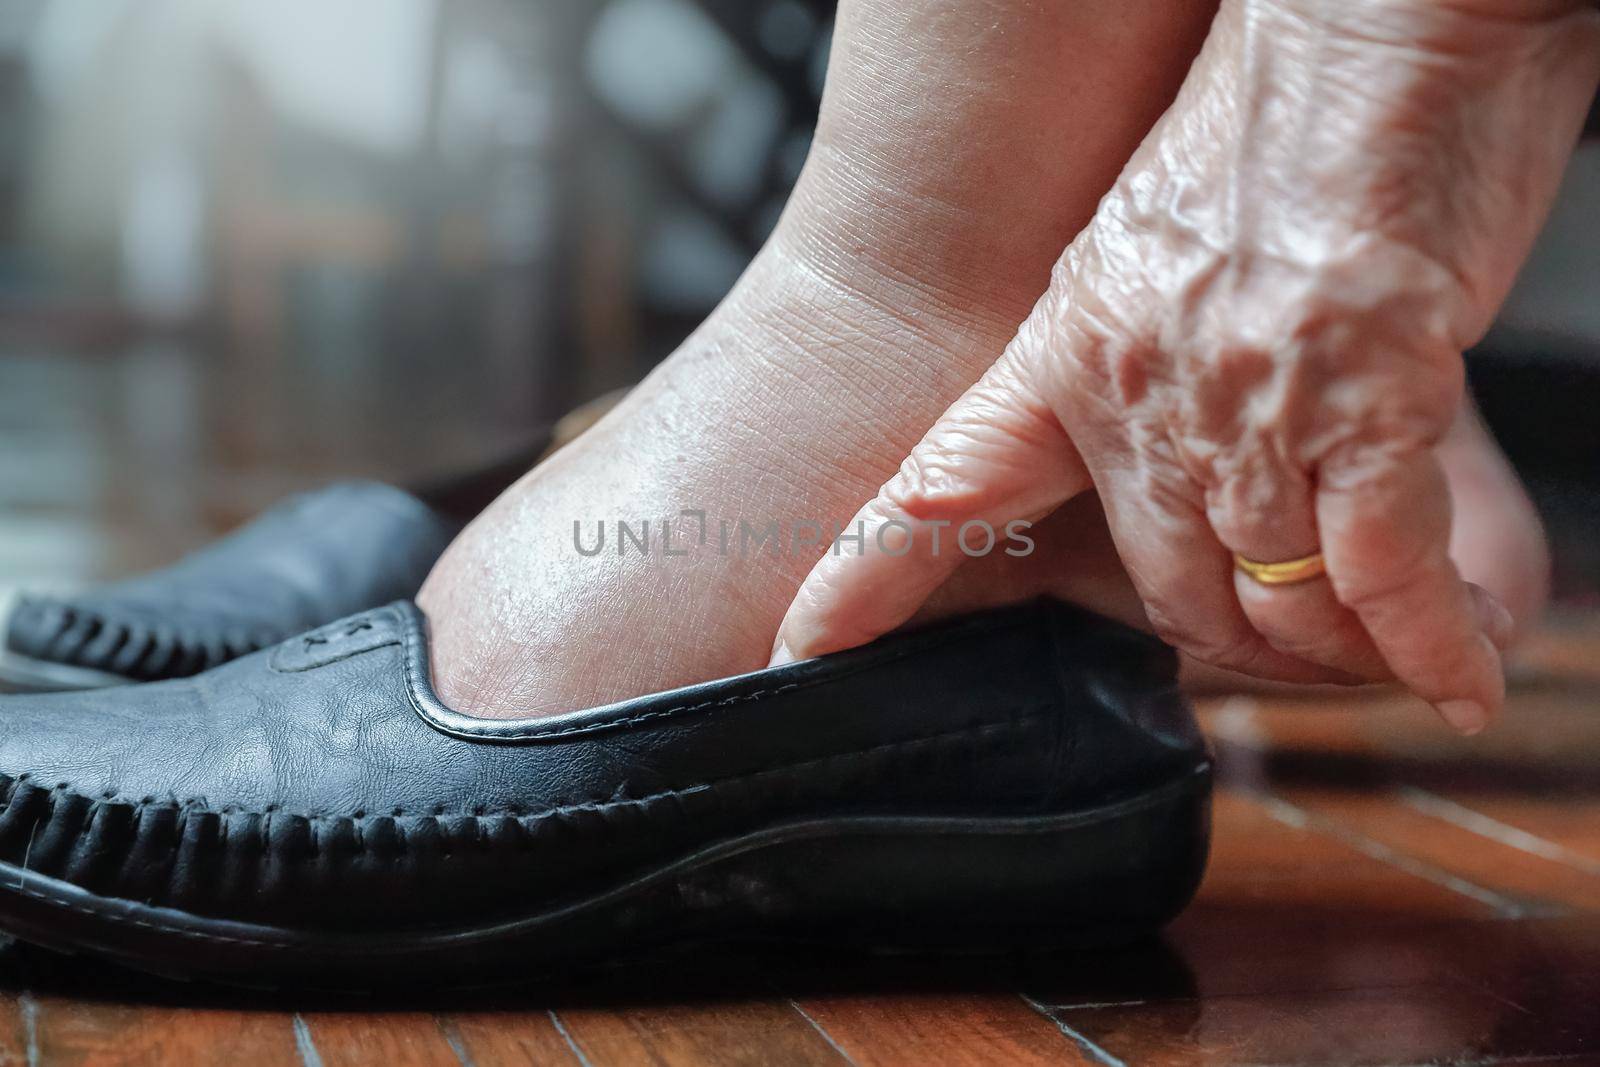 Elderly woman swollen feet putting on shoes by toa55